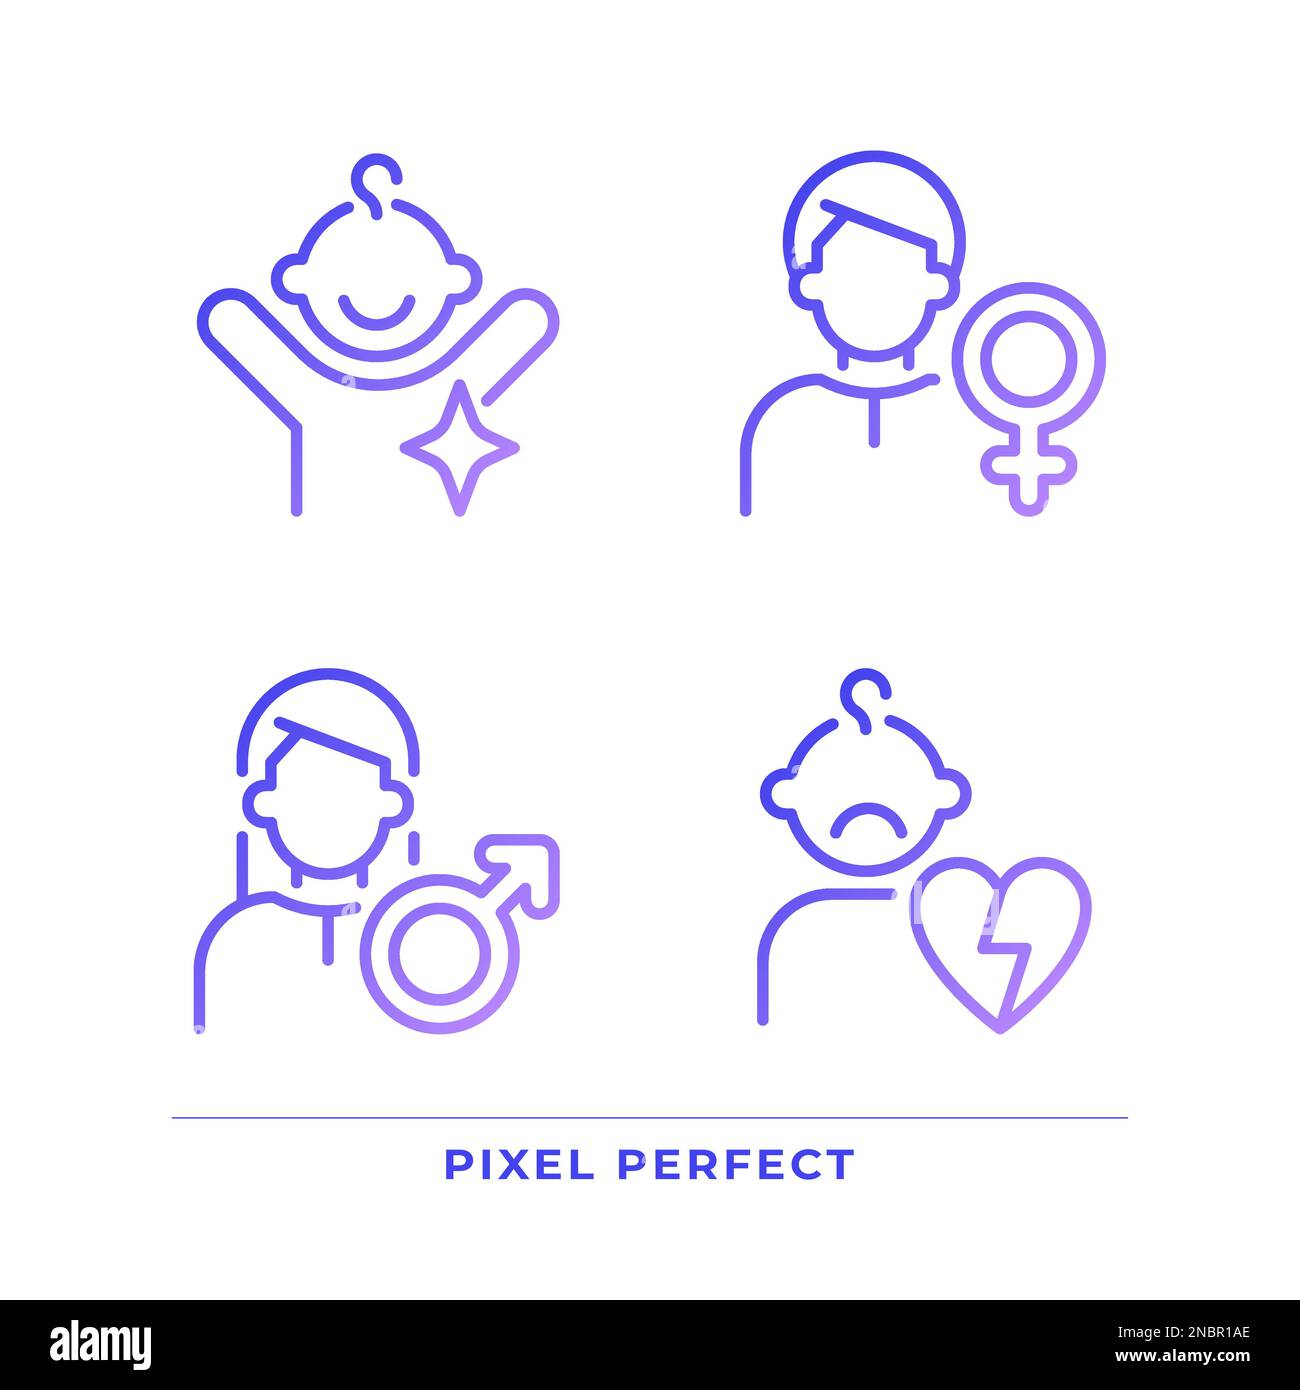 People pixel perfect gradient linear vector icons set Stock Vector